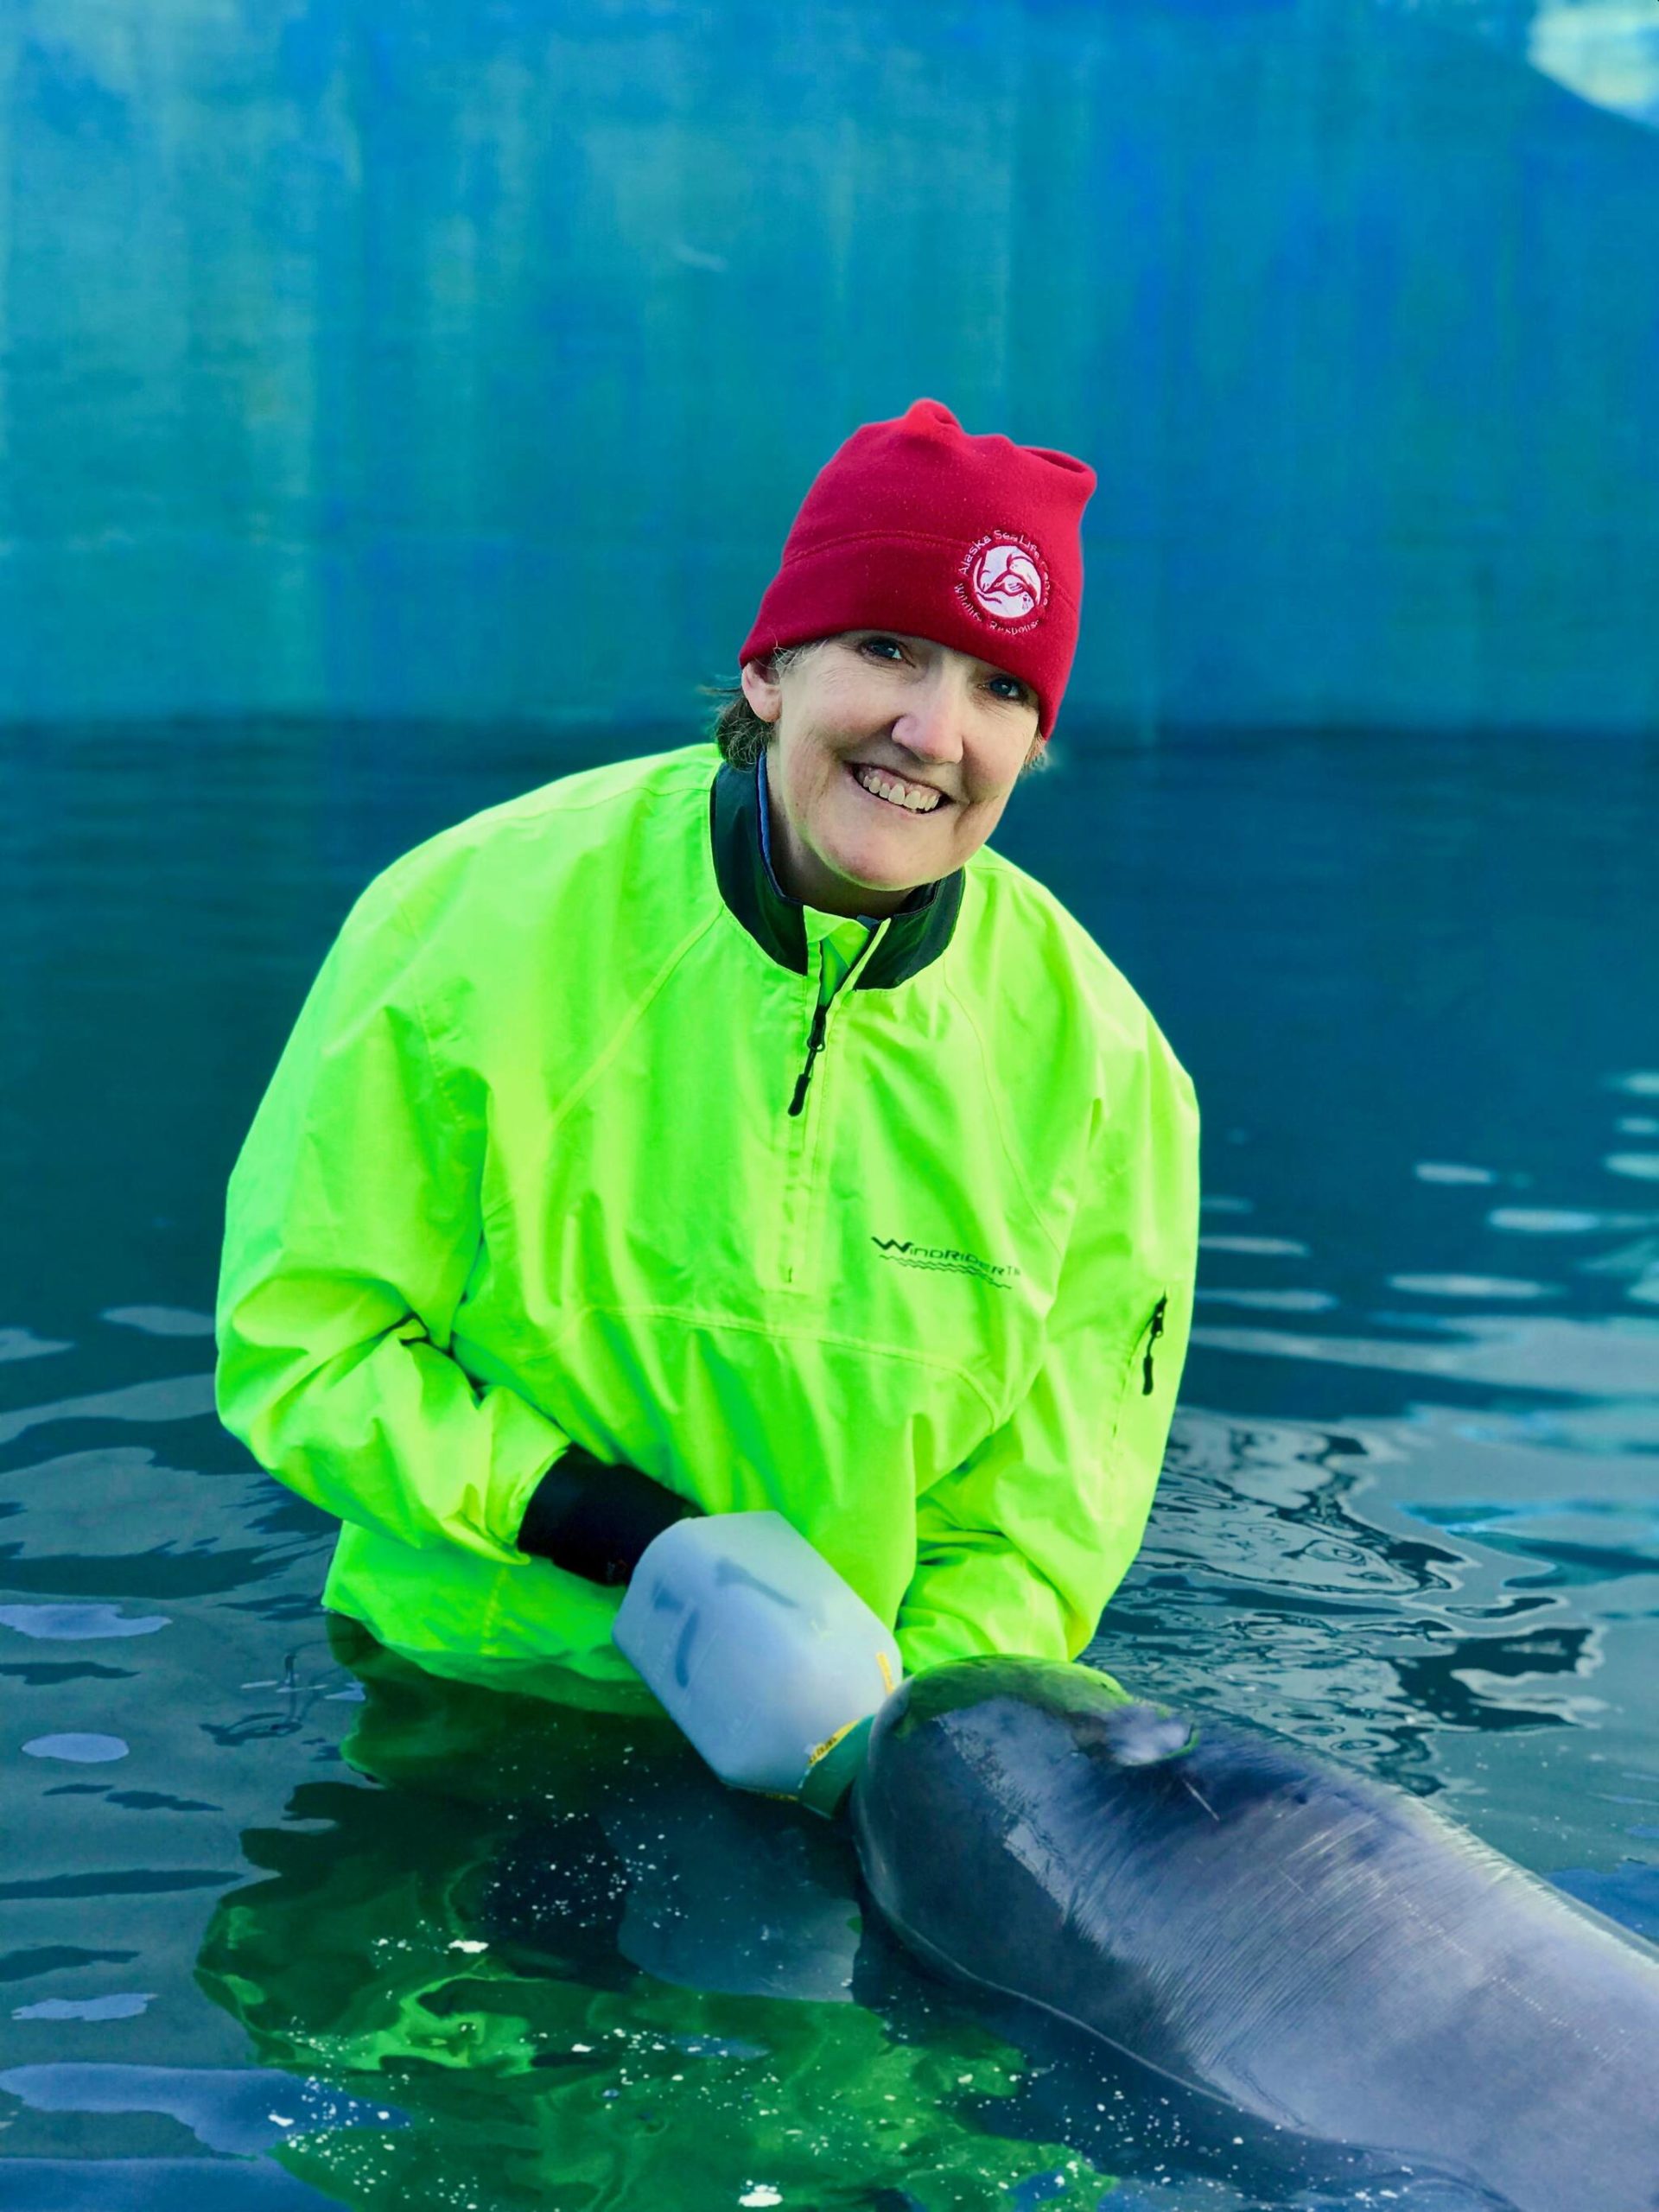 Tyonek is treated in the Center’s I.Sea.U critical care unit after he arrived at the SeaLife Center in 2017. He was treated by Dr. Carrie Goertz, Steve Aibel, and a Mystic Aquarium team member. (Photo courtesy of the Alaska SeaLife Center)